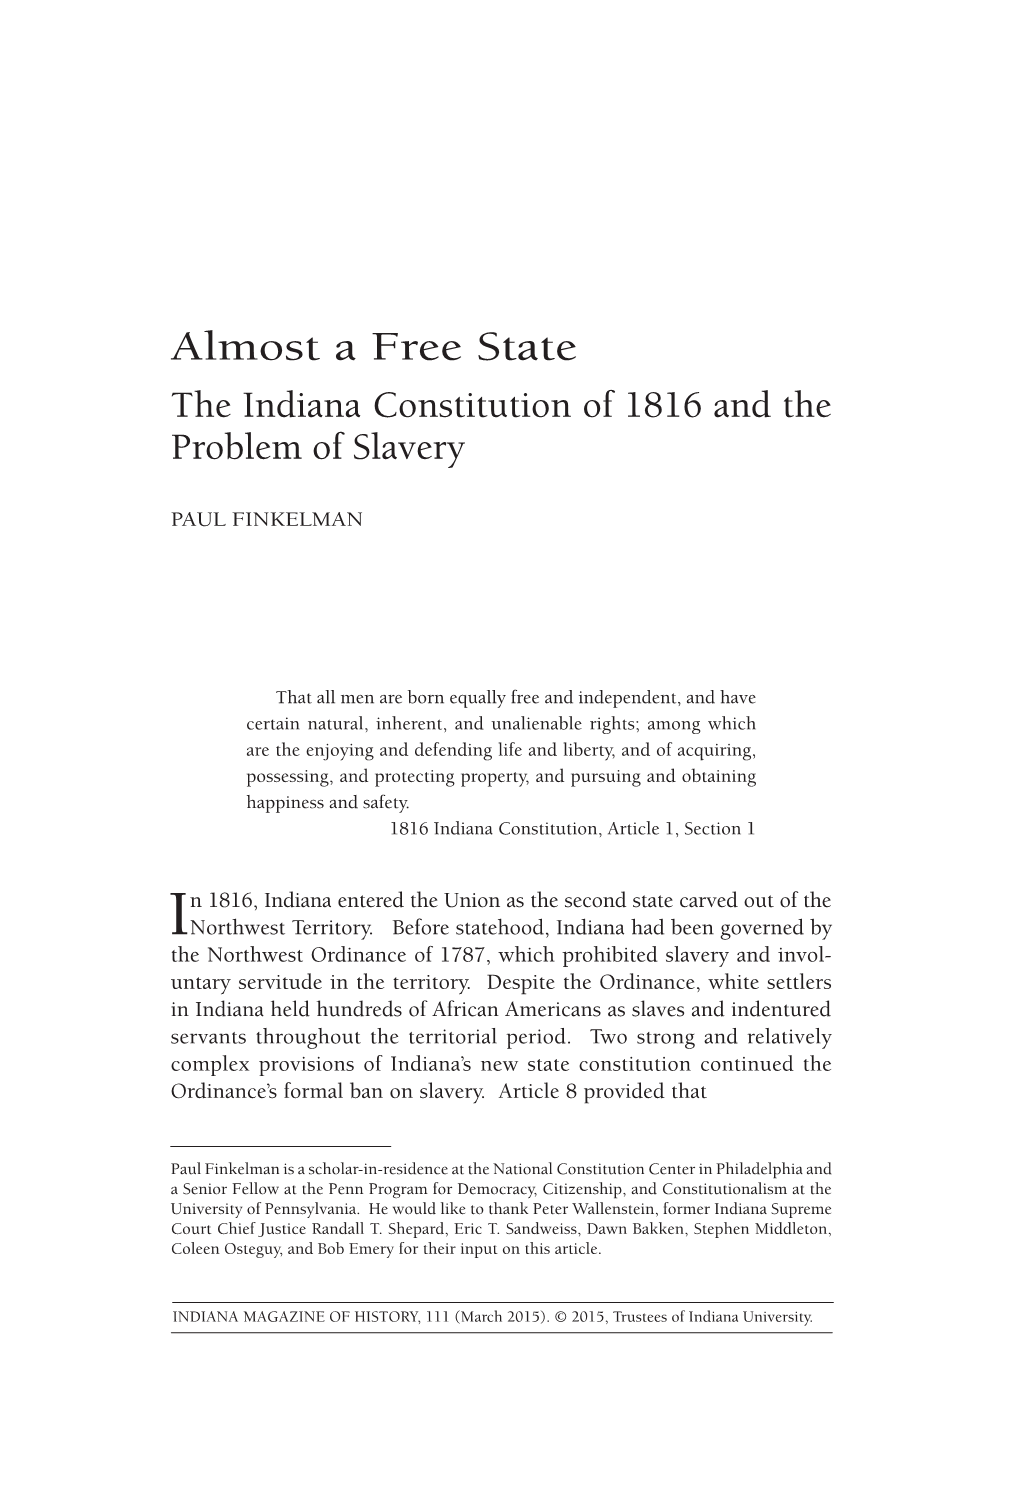 Almost a Free State the Indiana Constitution of 1816 and the Problem of Slavery